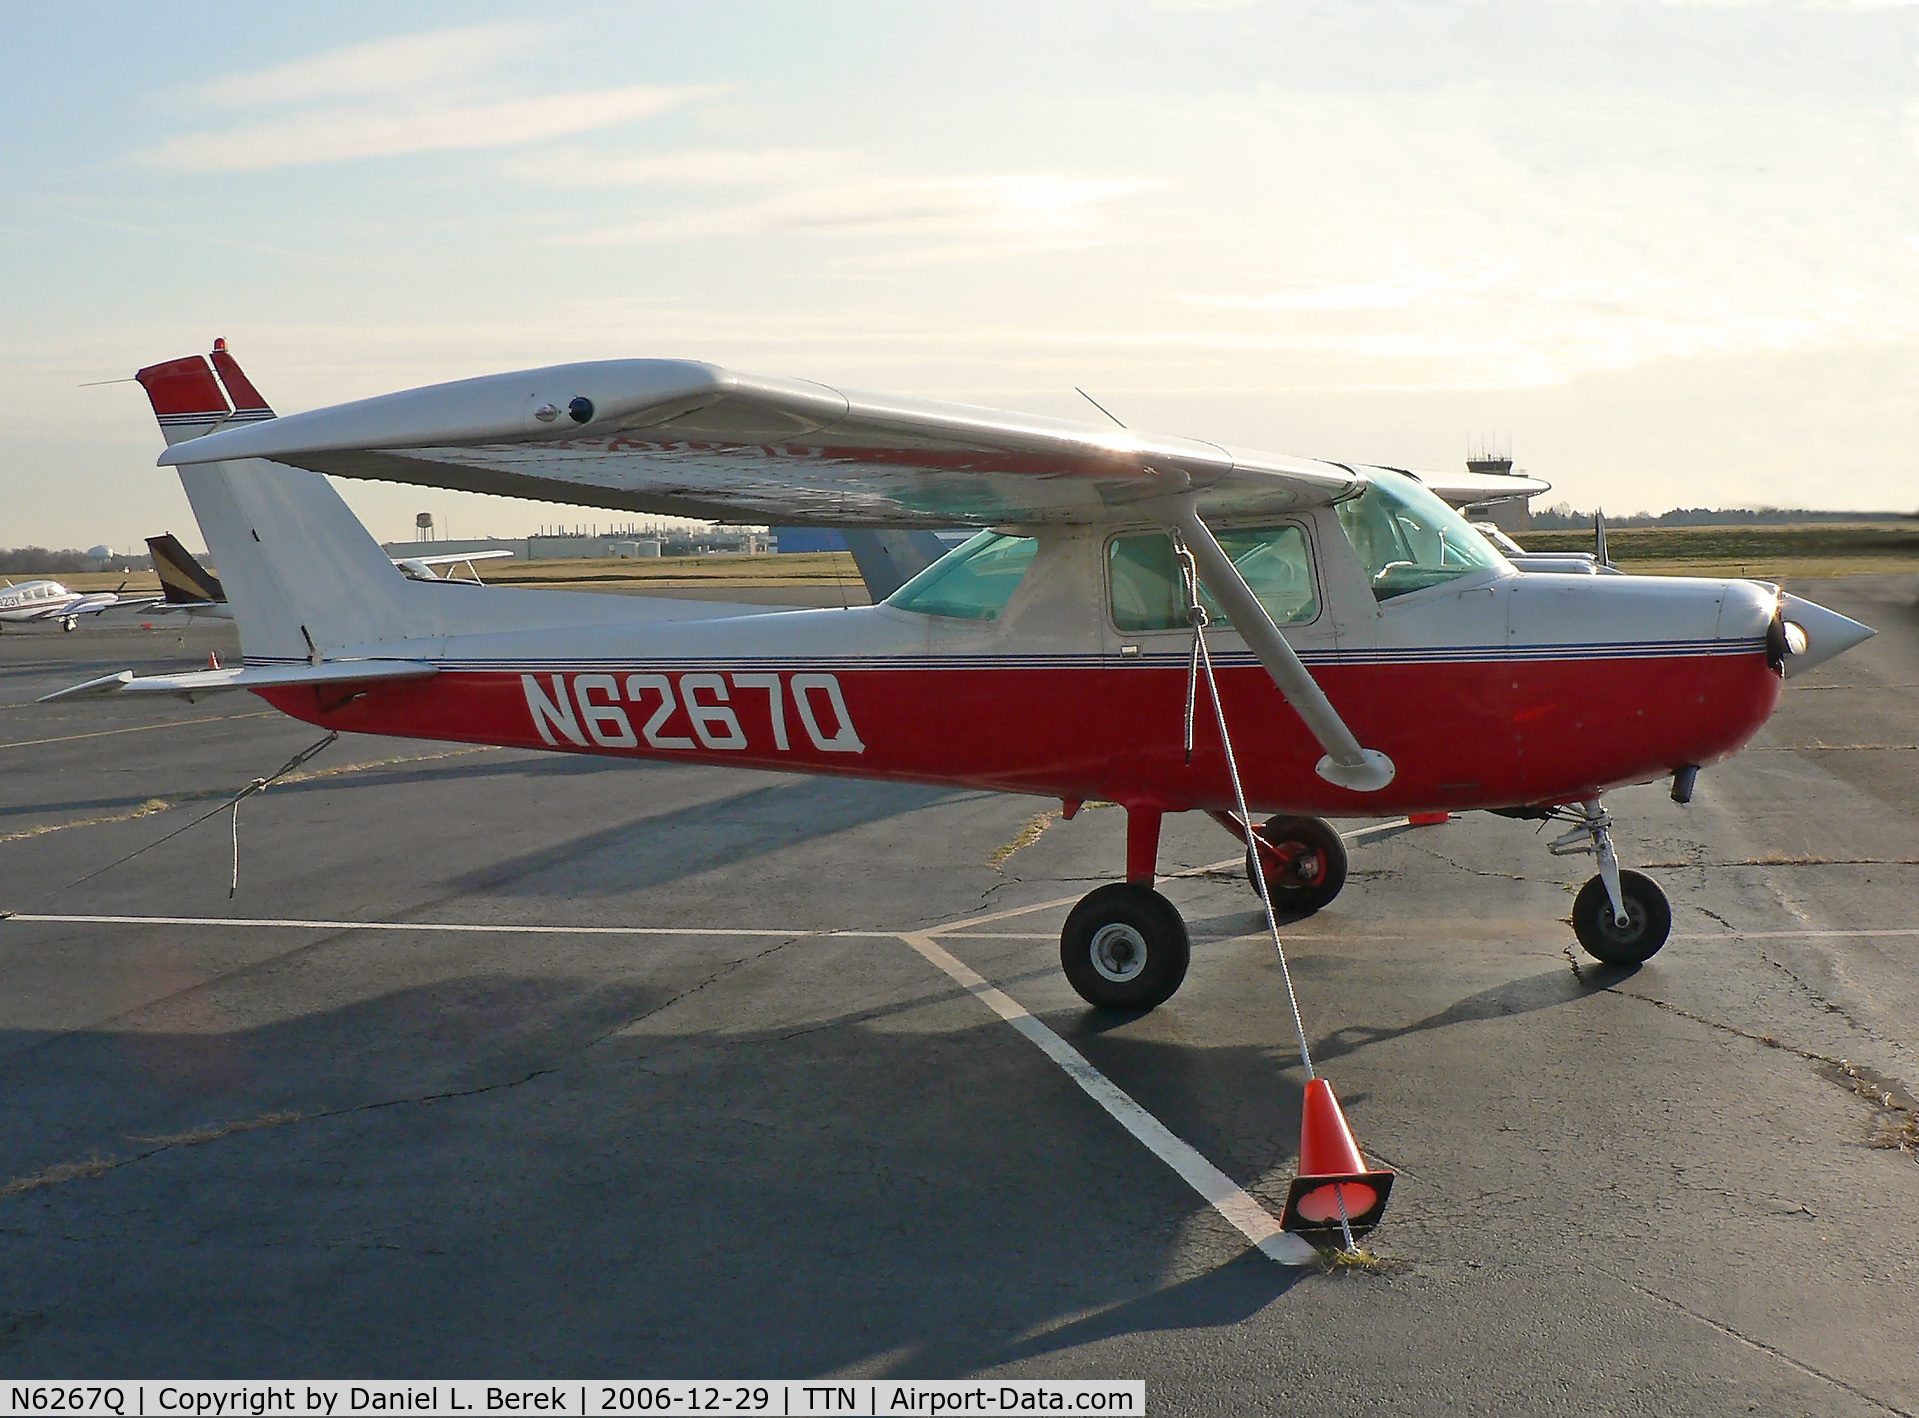 N6267Q, 1981 Cessna 152 C/N 15285214, One of several trainers belonging to Mercer County College, this 1981 example is basking in the evening sun at Trenton Mercer Airport (TTN).